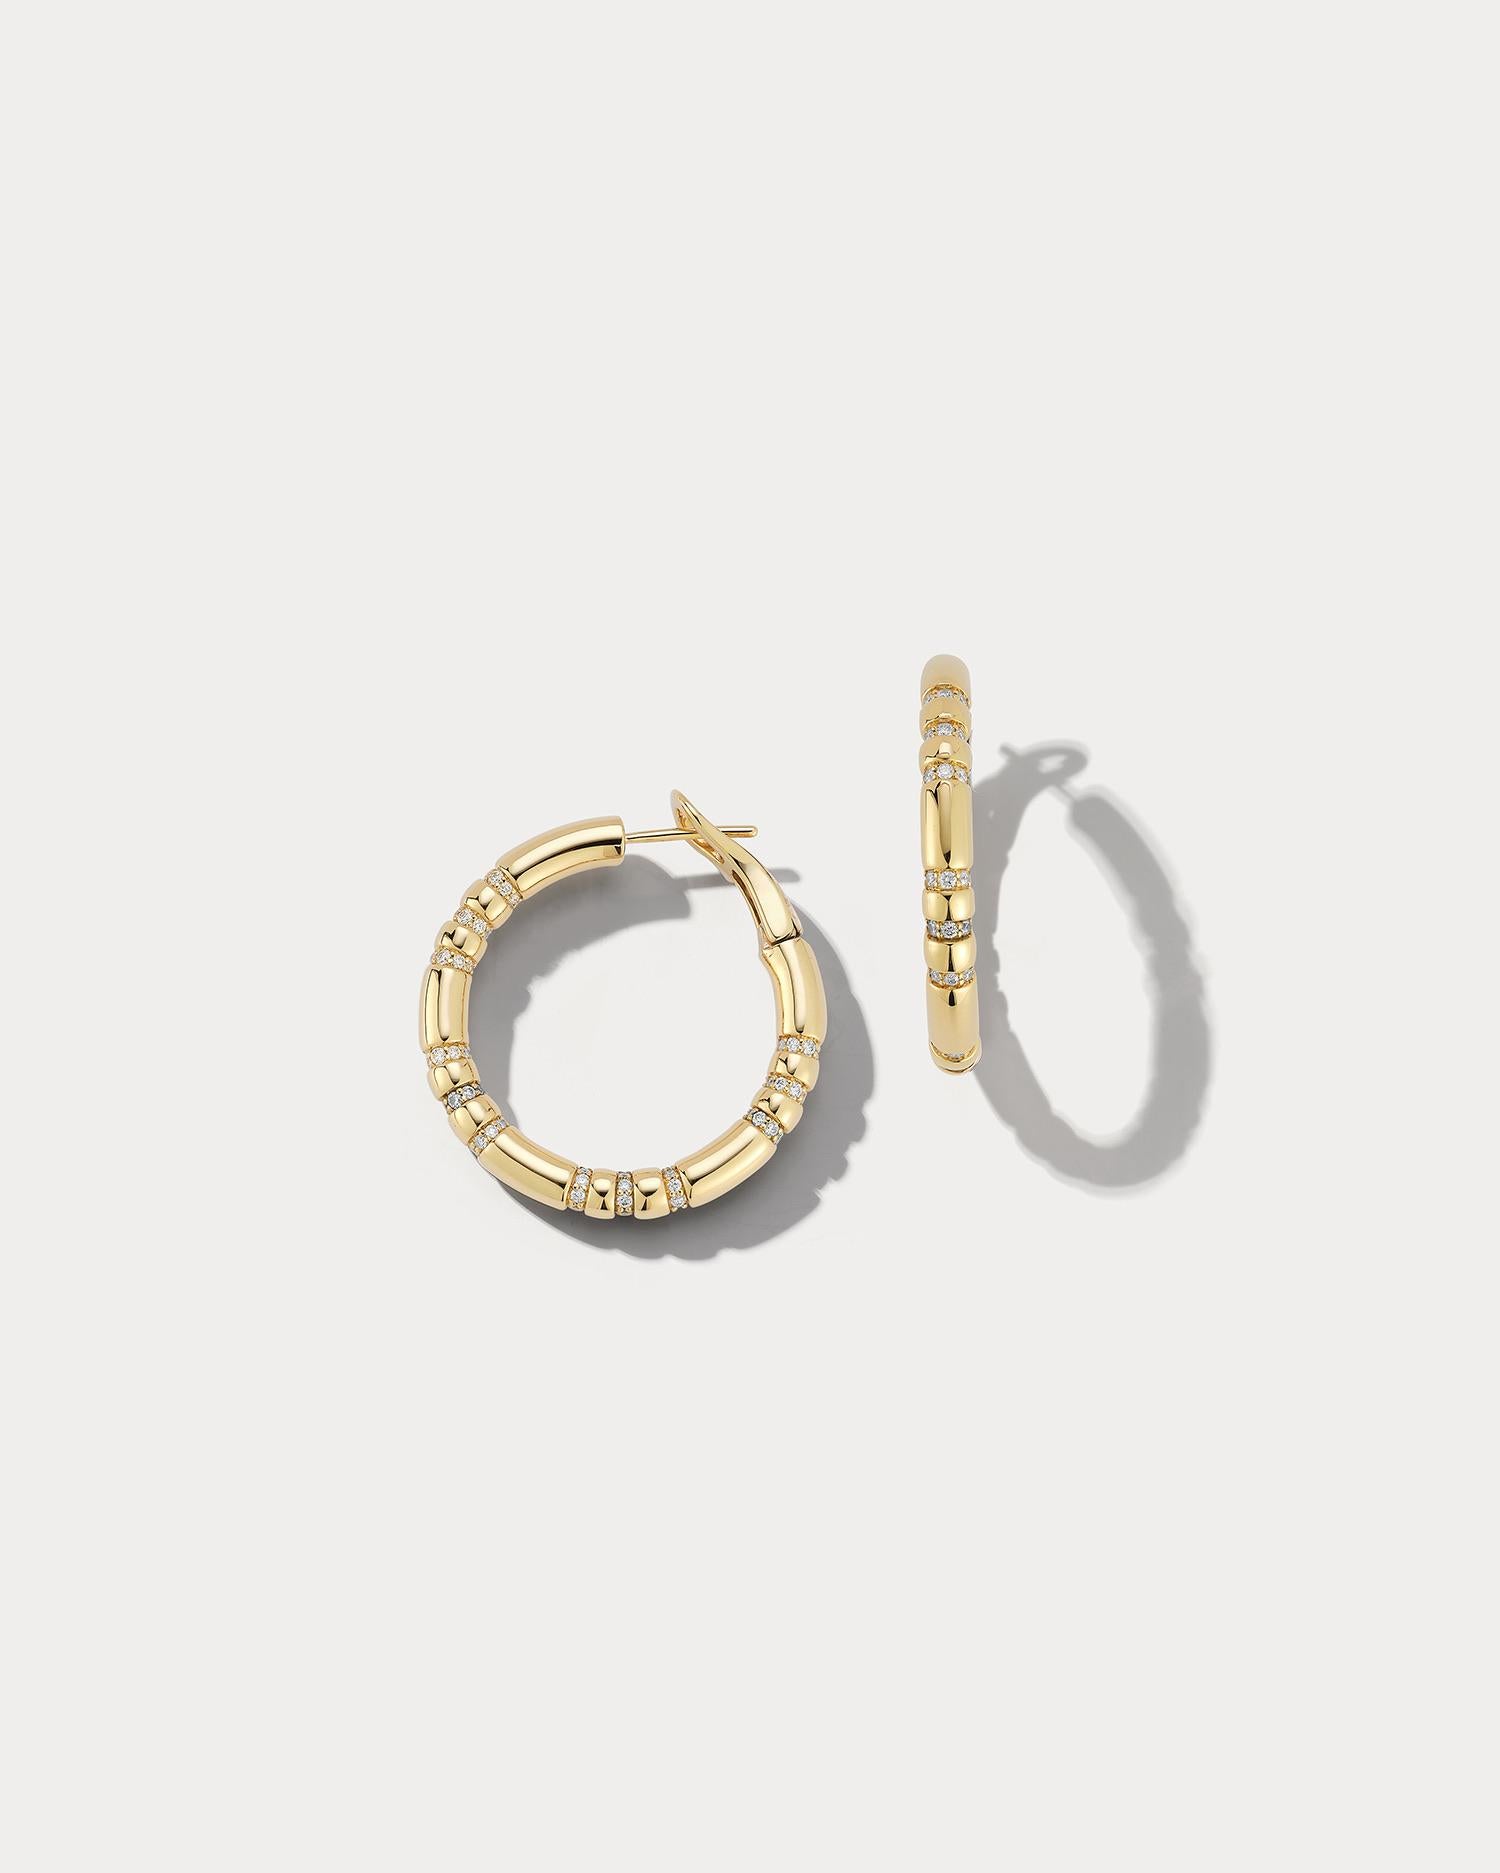 These charming hoop earrings are crafted from 18k yellow gold and feature accents of 1.56 carats of dazzling diamonds. The hoops are small in size, making them perfect for everyday wear or to add a touch of glamour to a special occasion. The